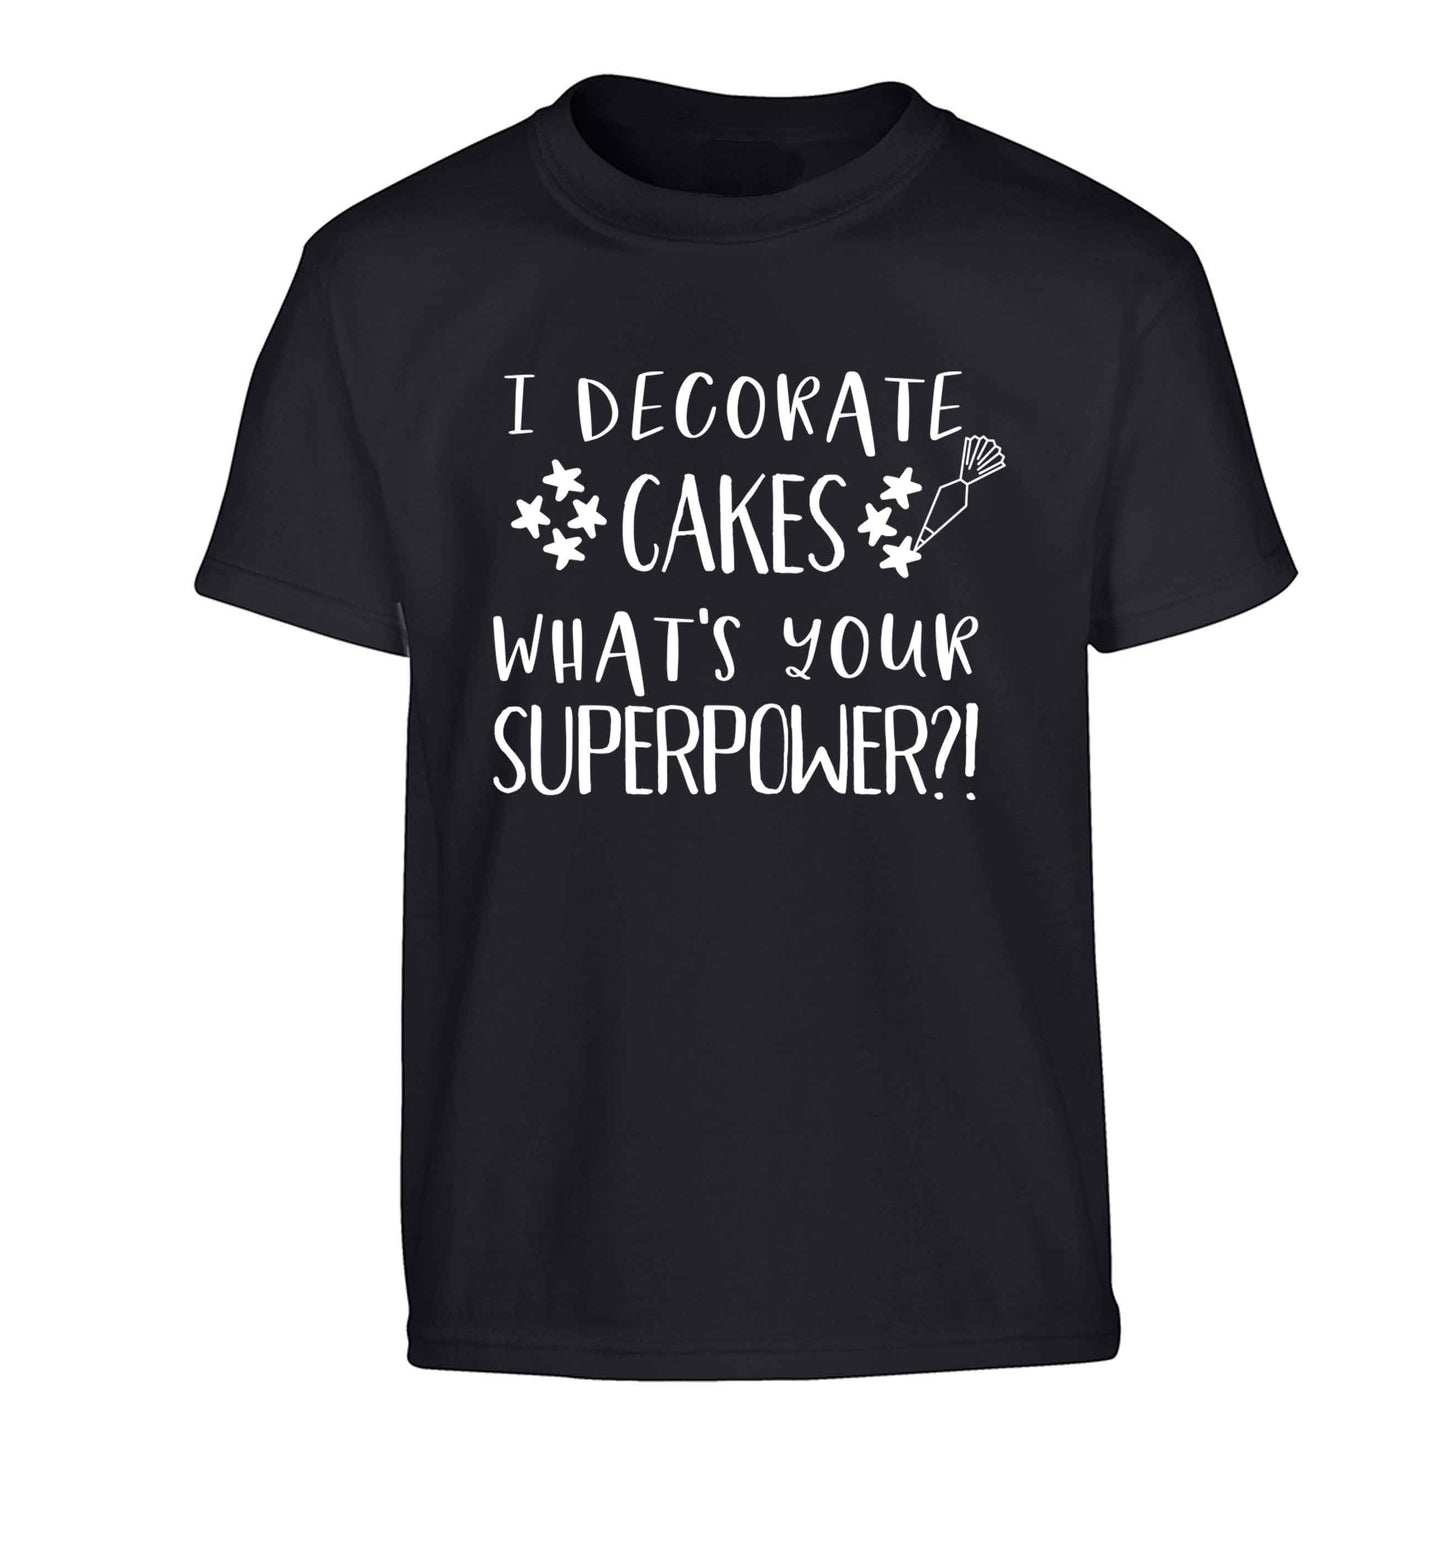 I decorate cakes what's your superpower?! Children's black Tshirt 12-13 Years